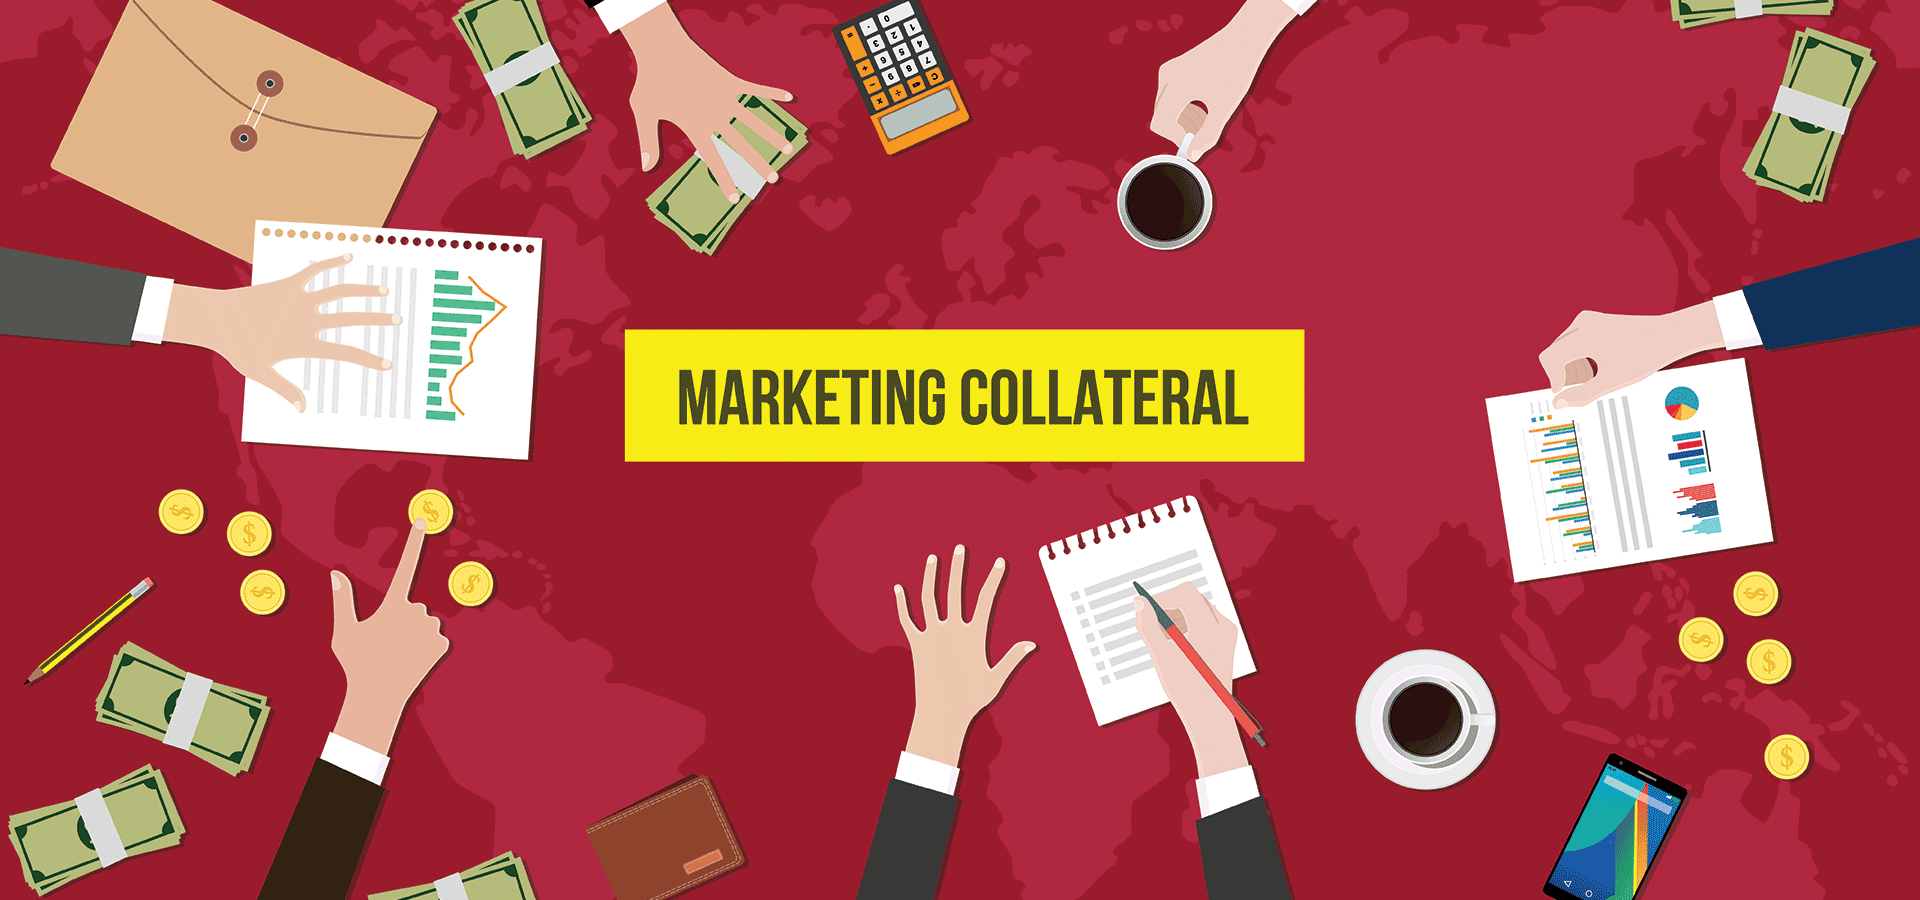 Collateral marketing can carry the brand